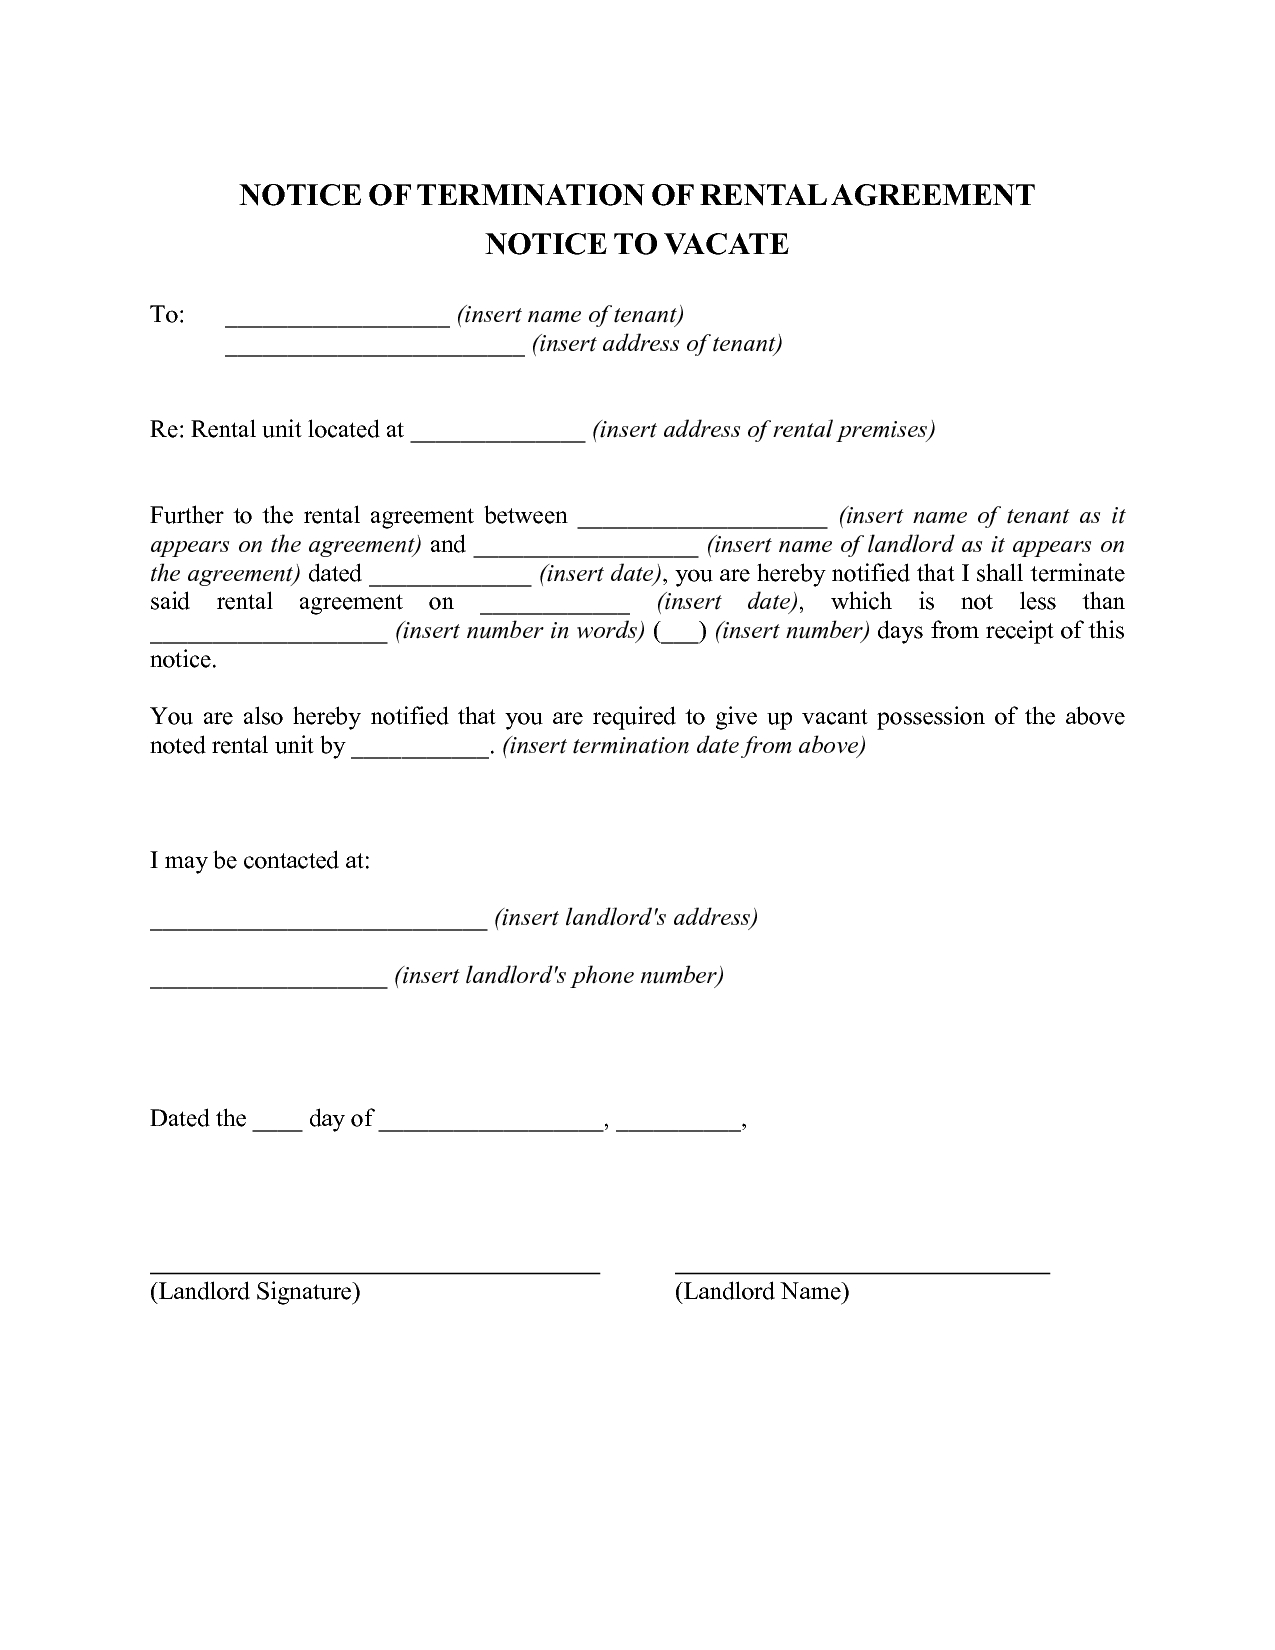 Landlord Notice Letter To Tenant Template Examples - Letter Template ...